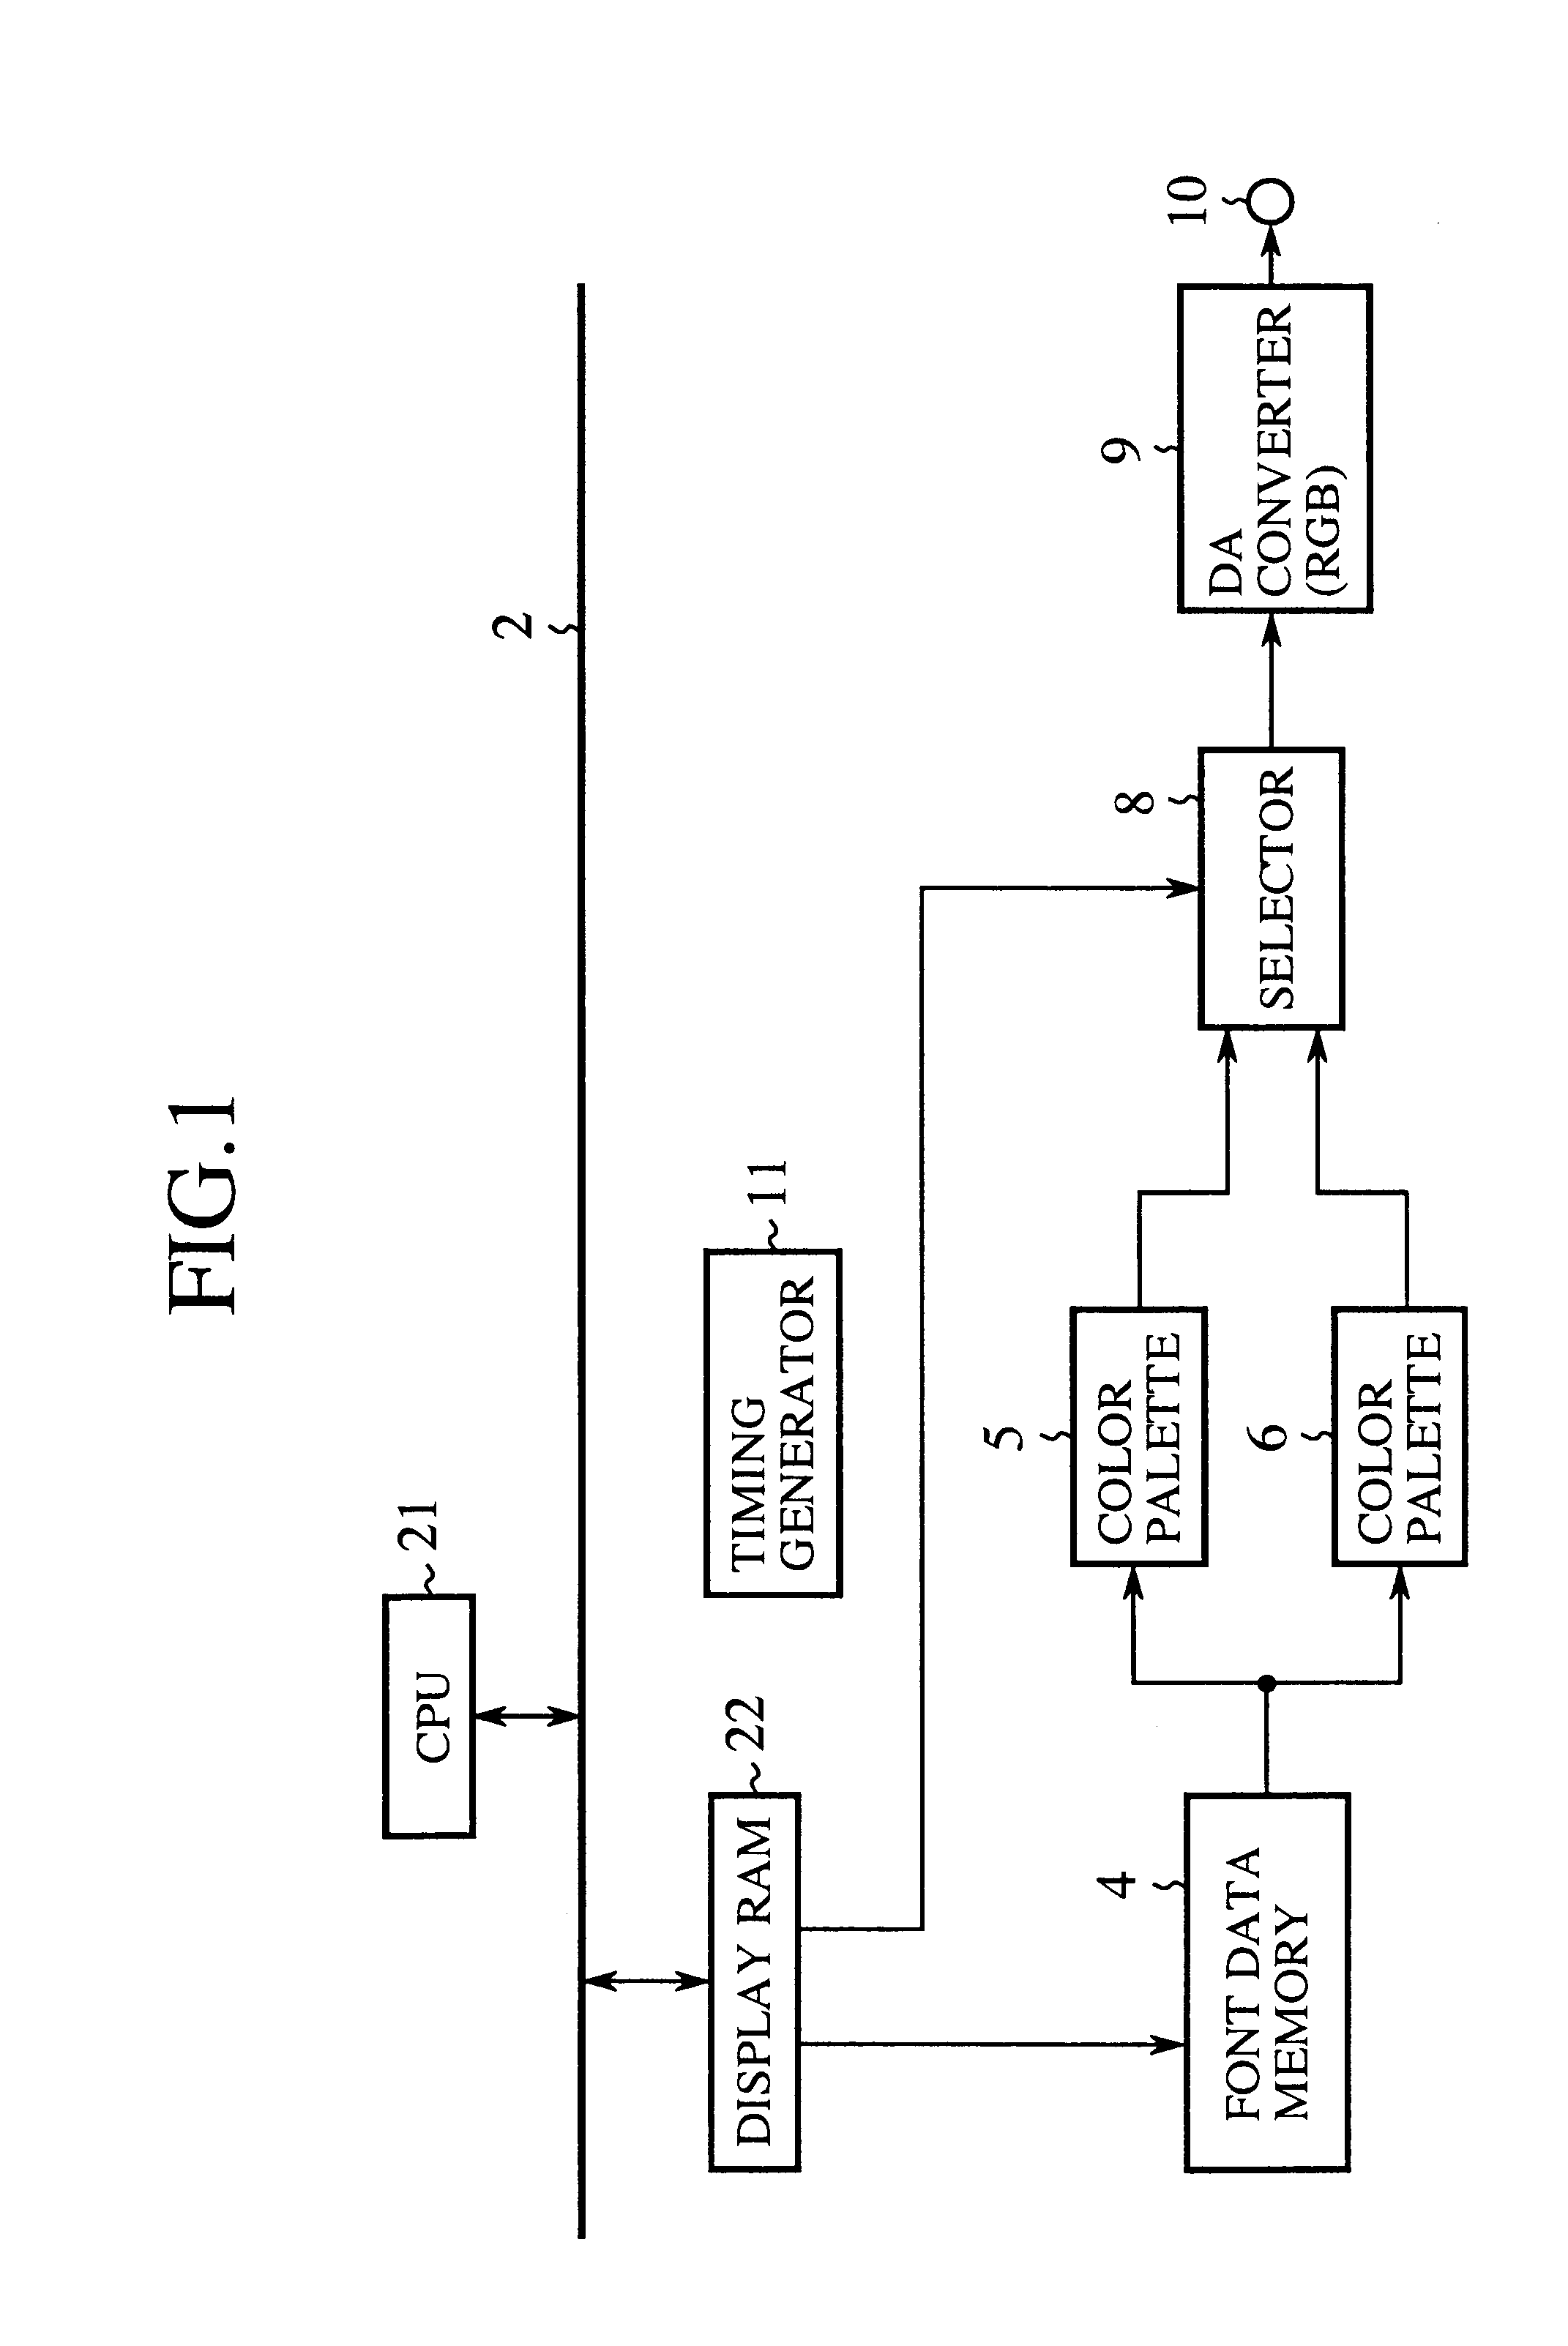 Screen display unit capable of displaying greater number of colors on the same screen